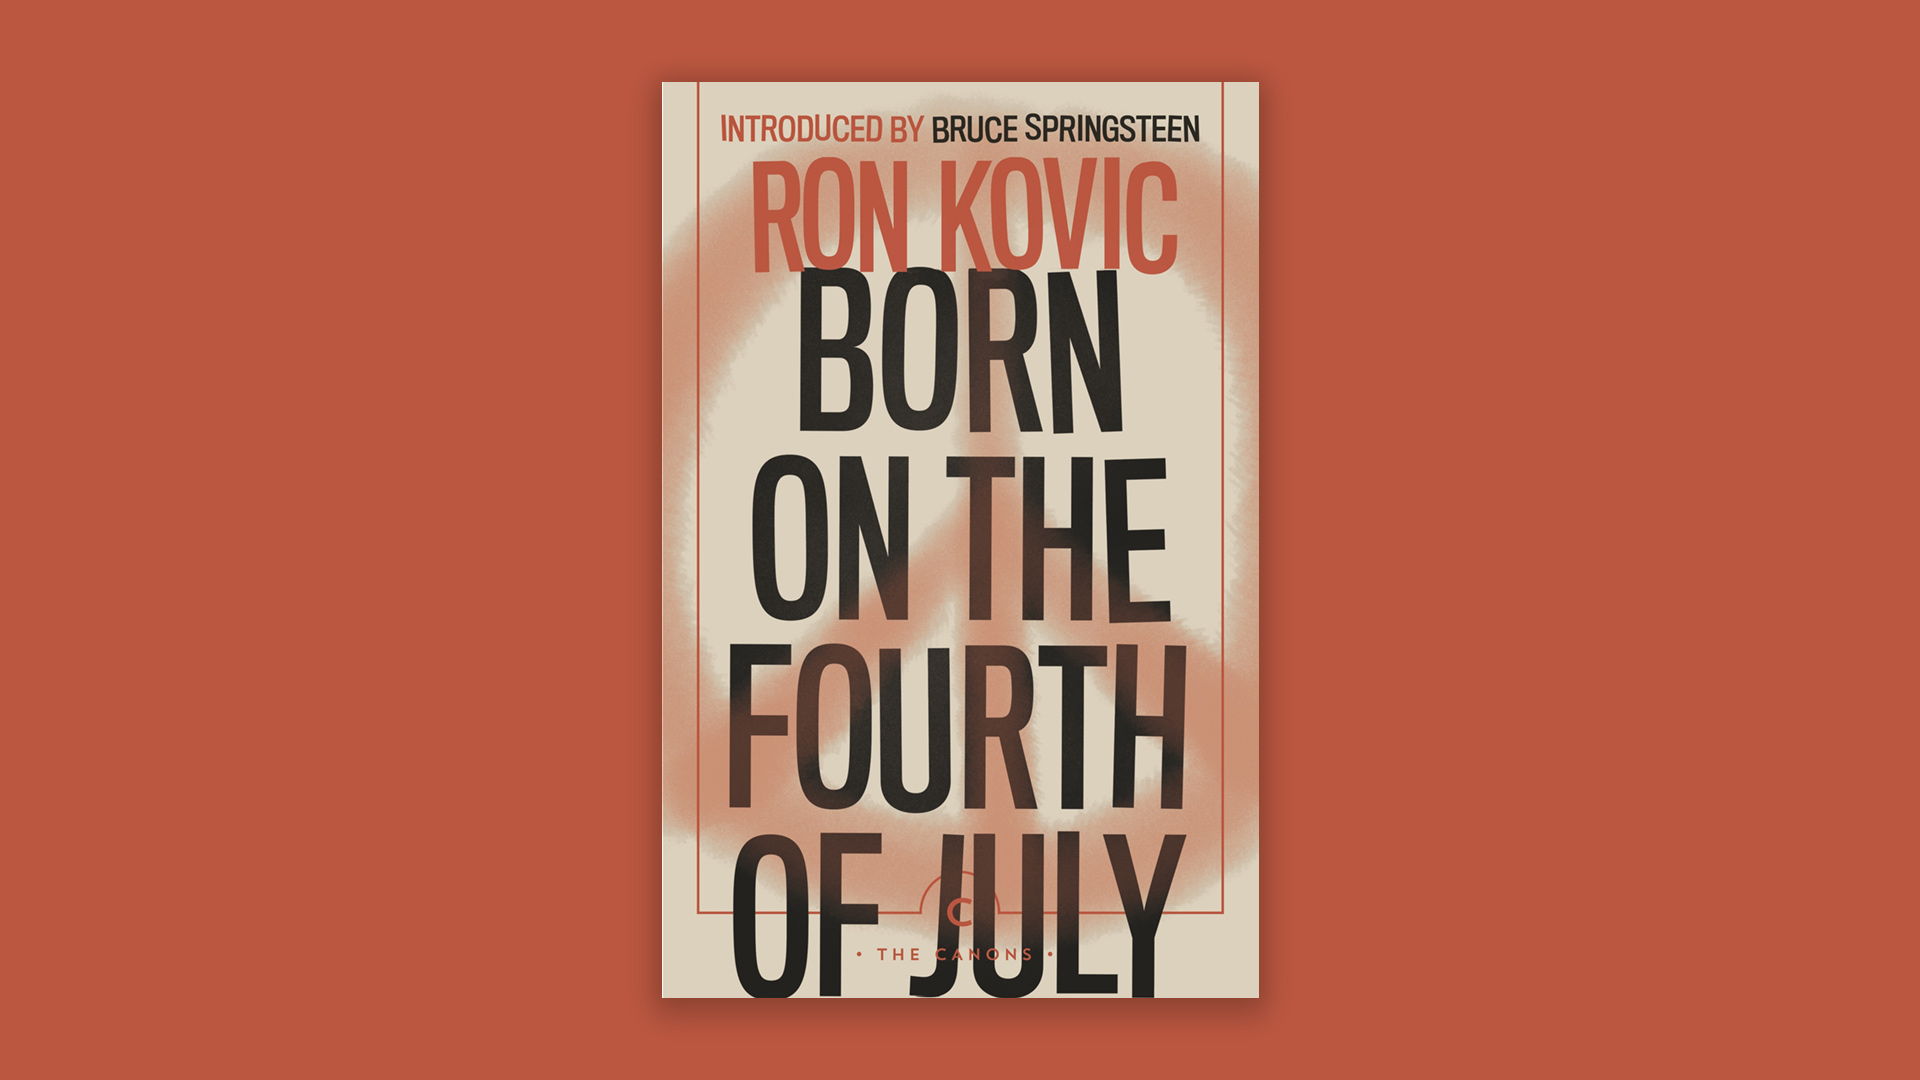 Bruce Springsteen's foreword to Born on the Fourth of July